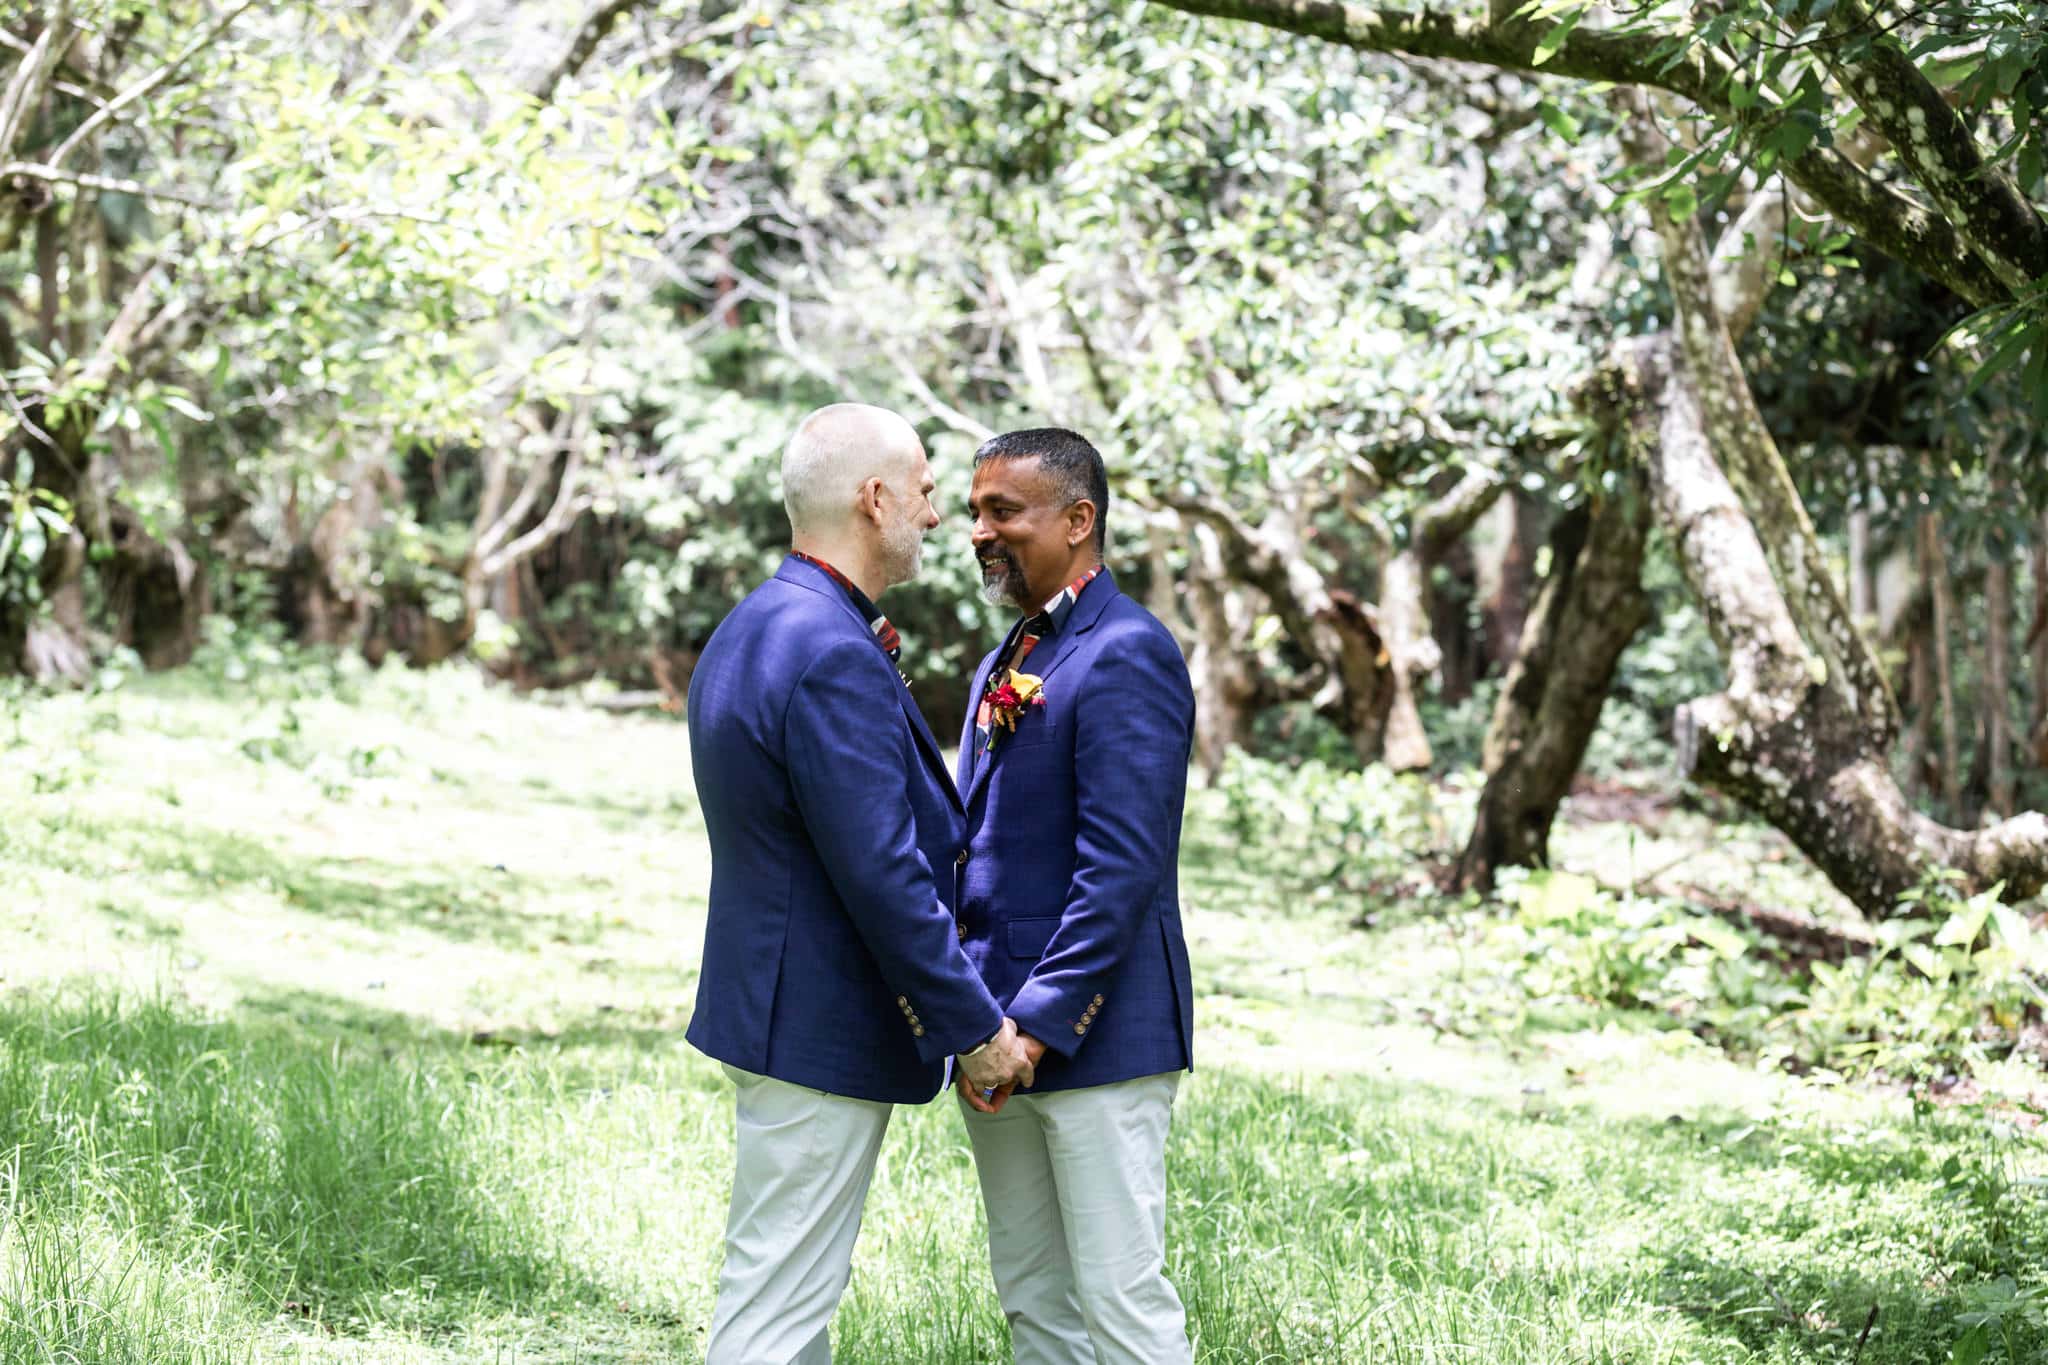 Pether's Rainforest Intimate Wedding Ceremony on location couples photos.